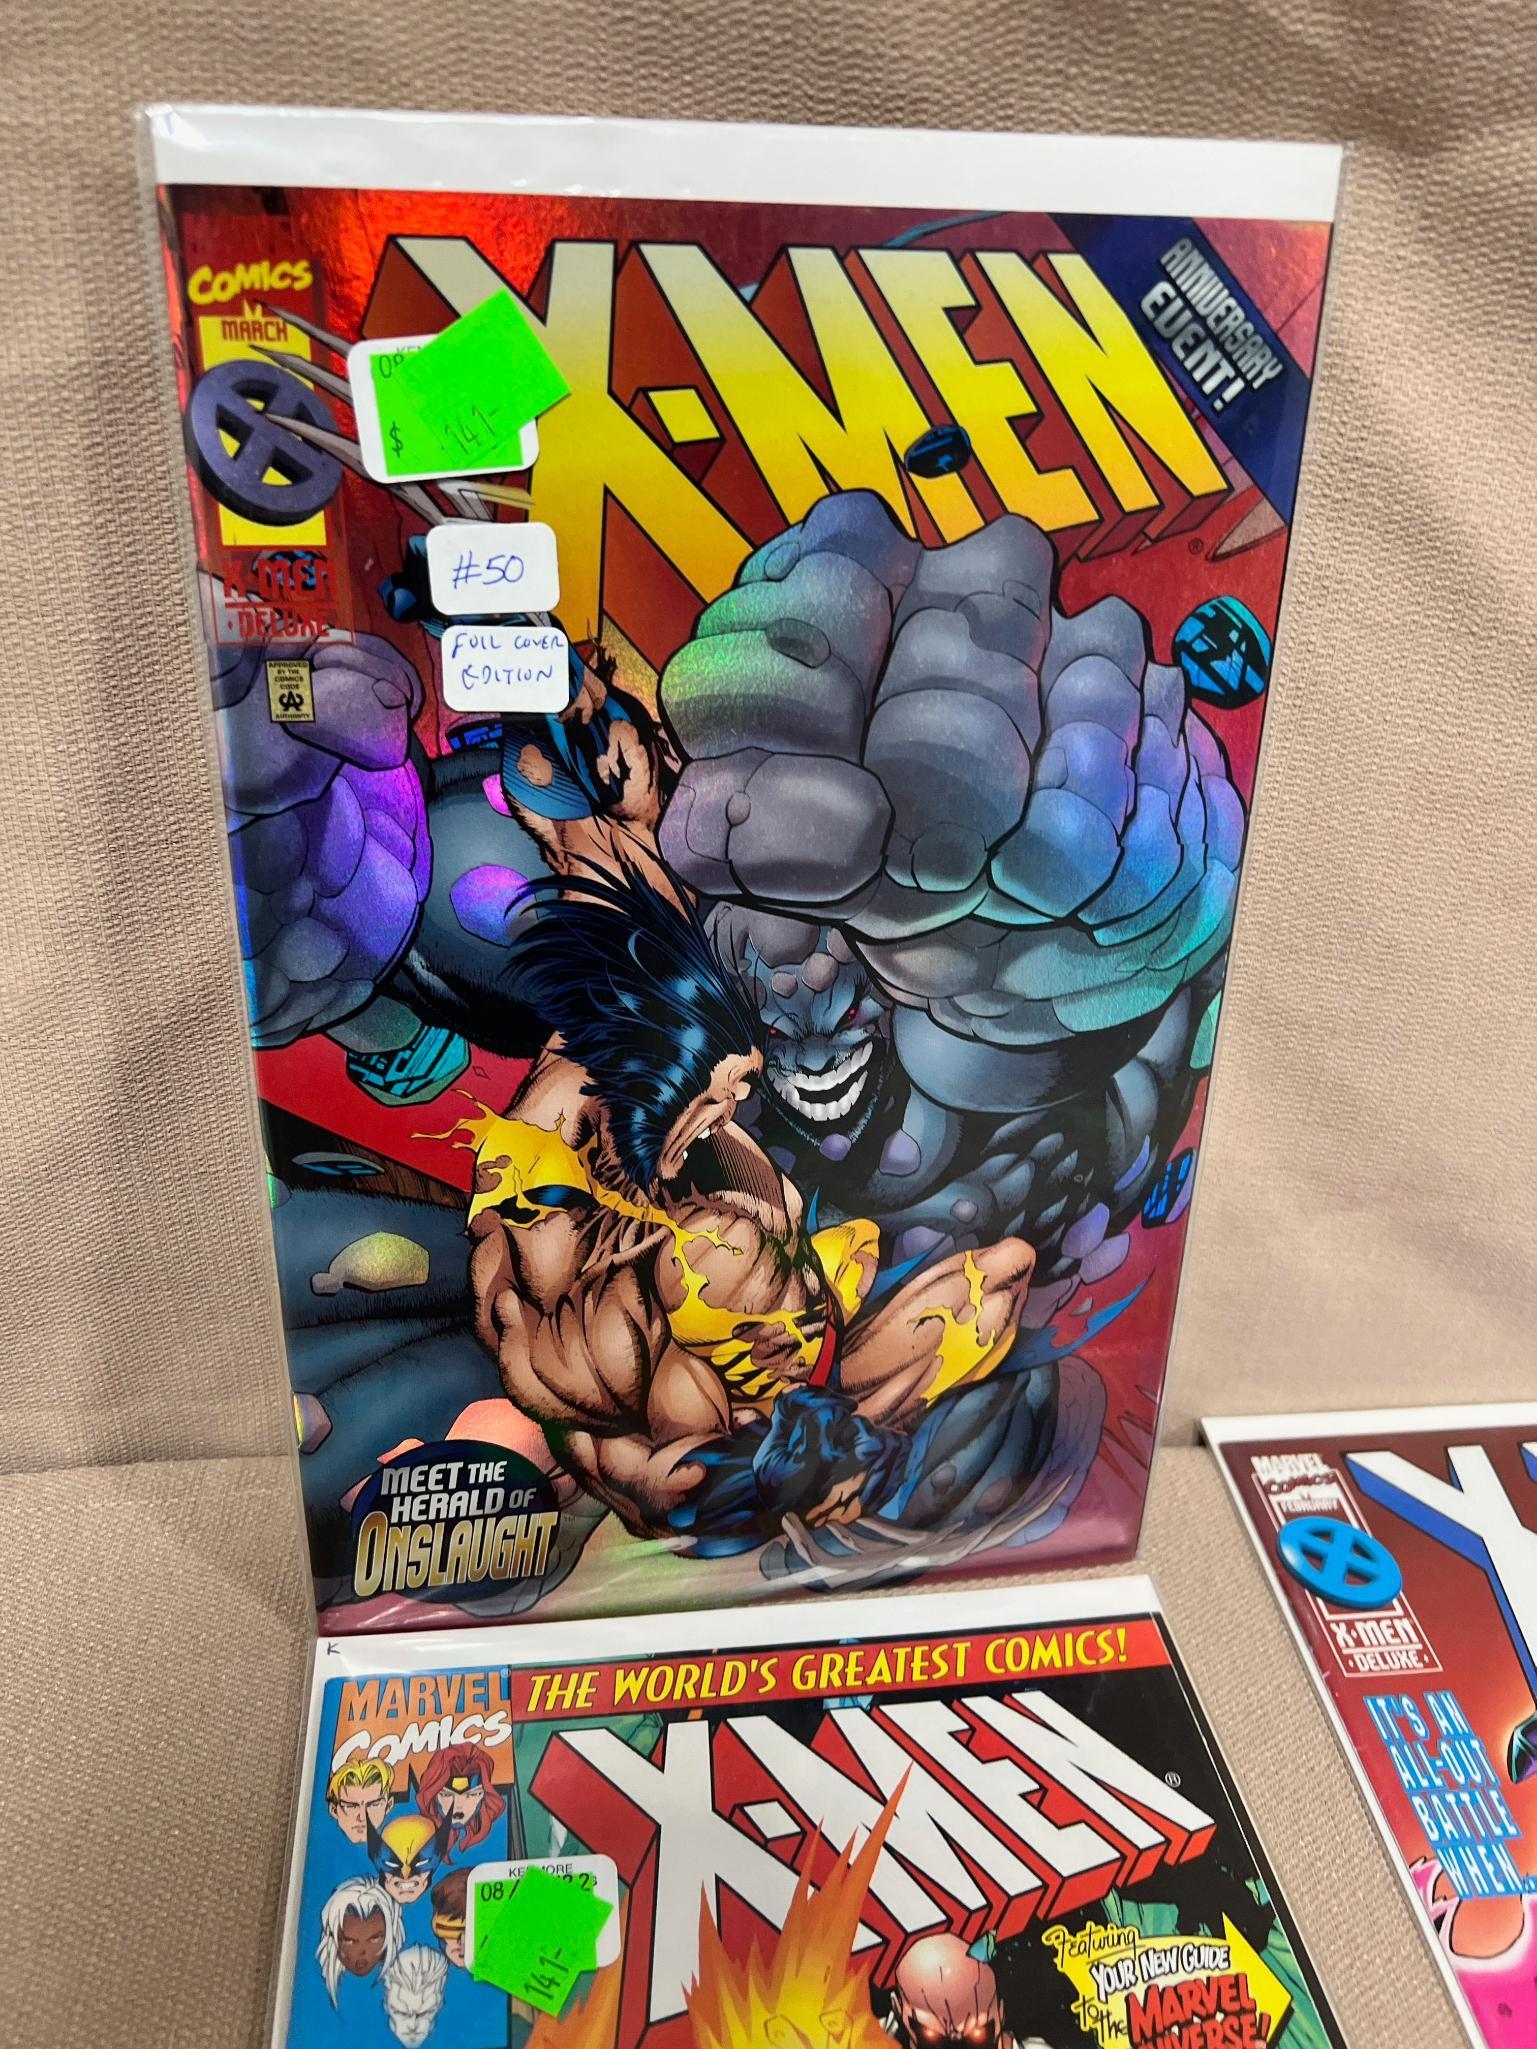 21- X-Men Deluxe including No. 50 FULL COVER